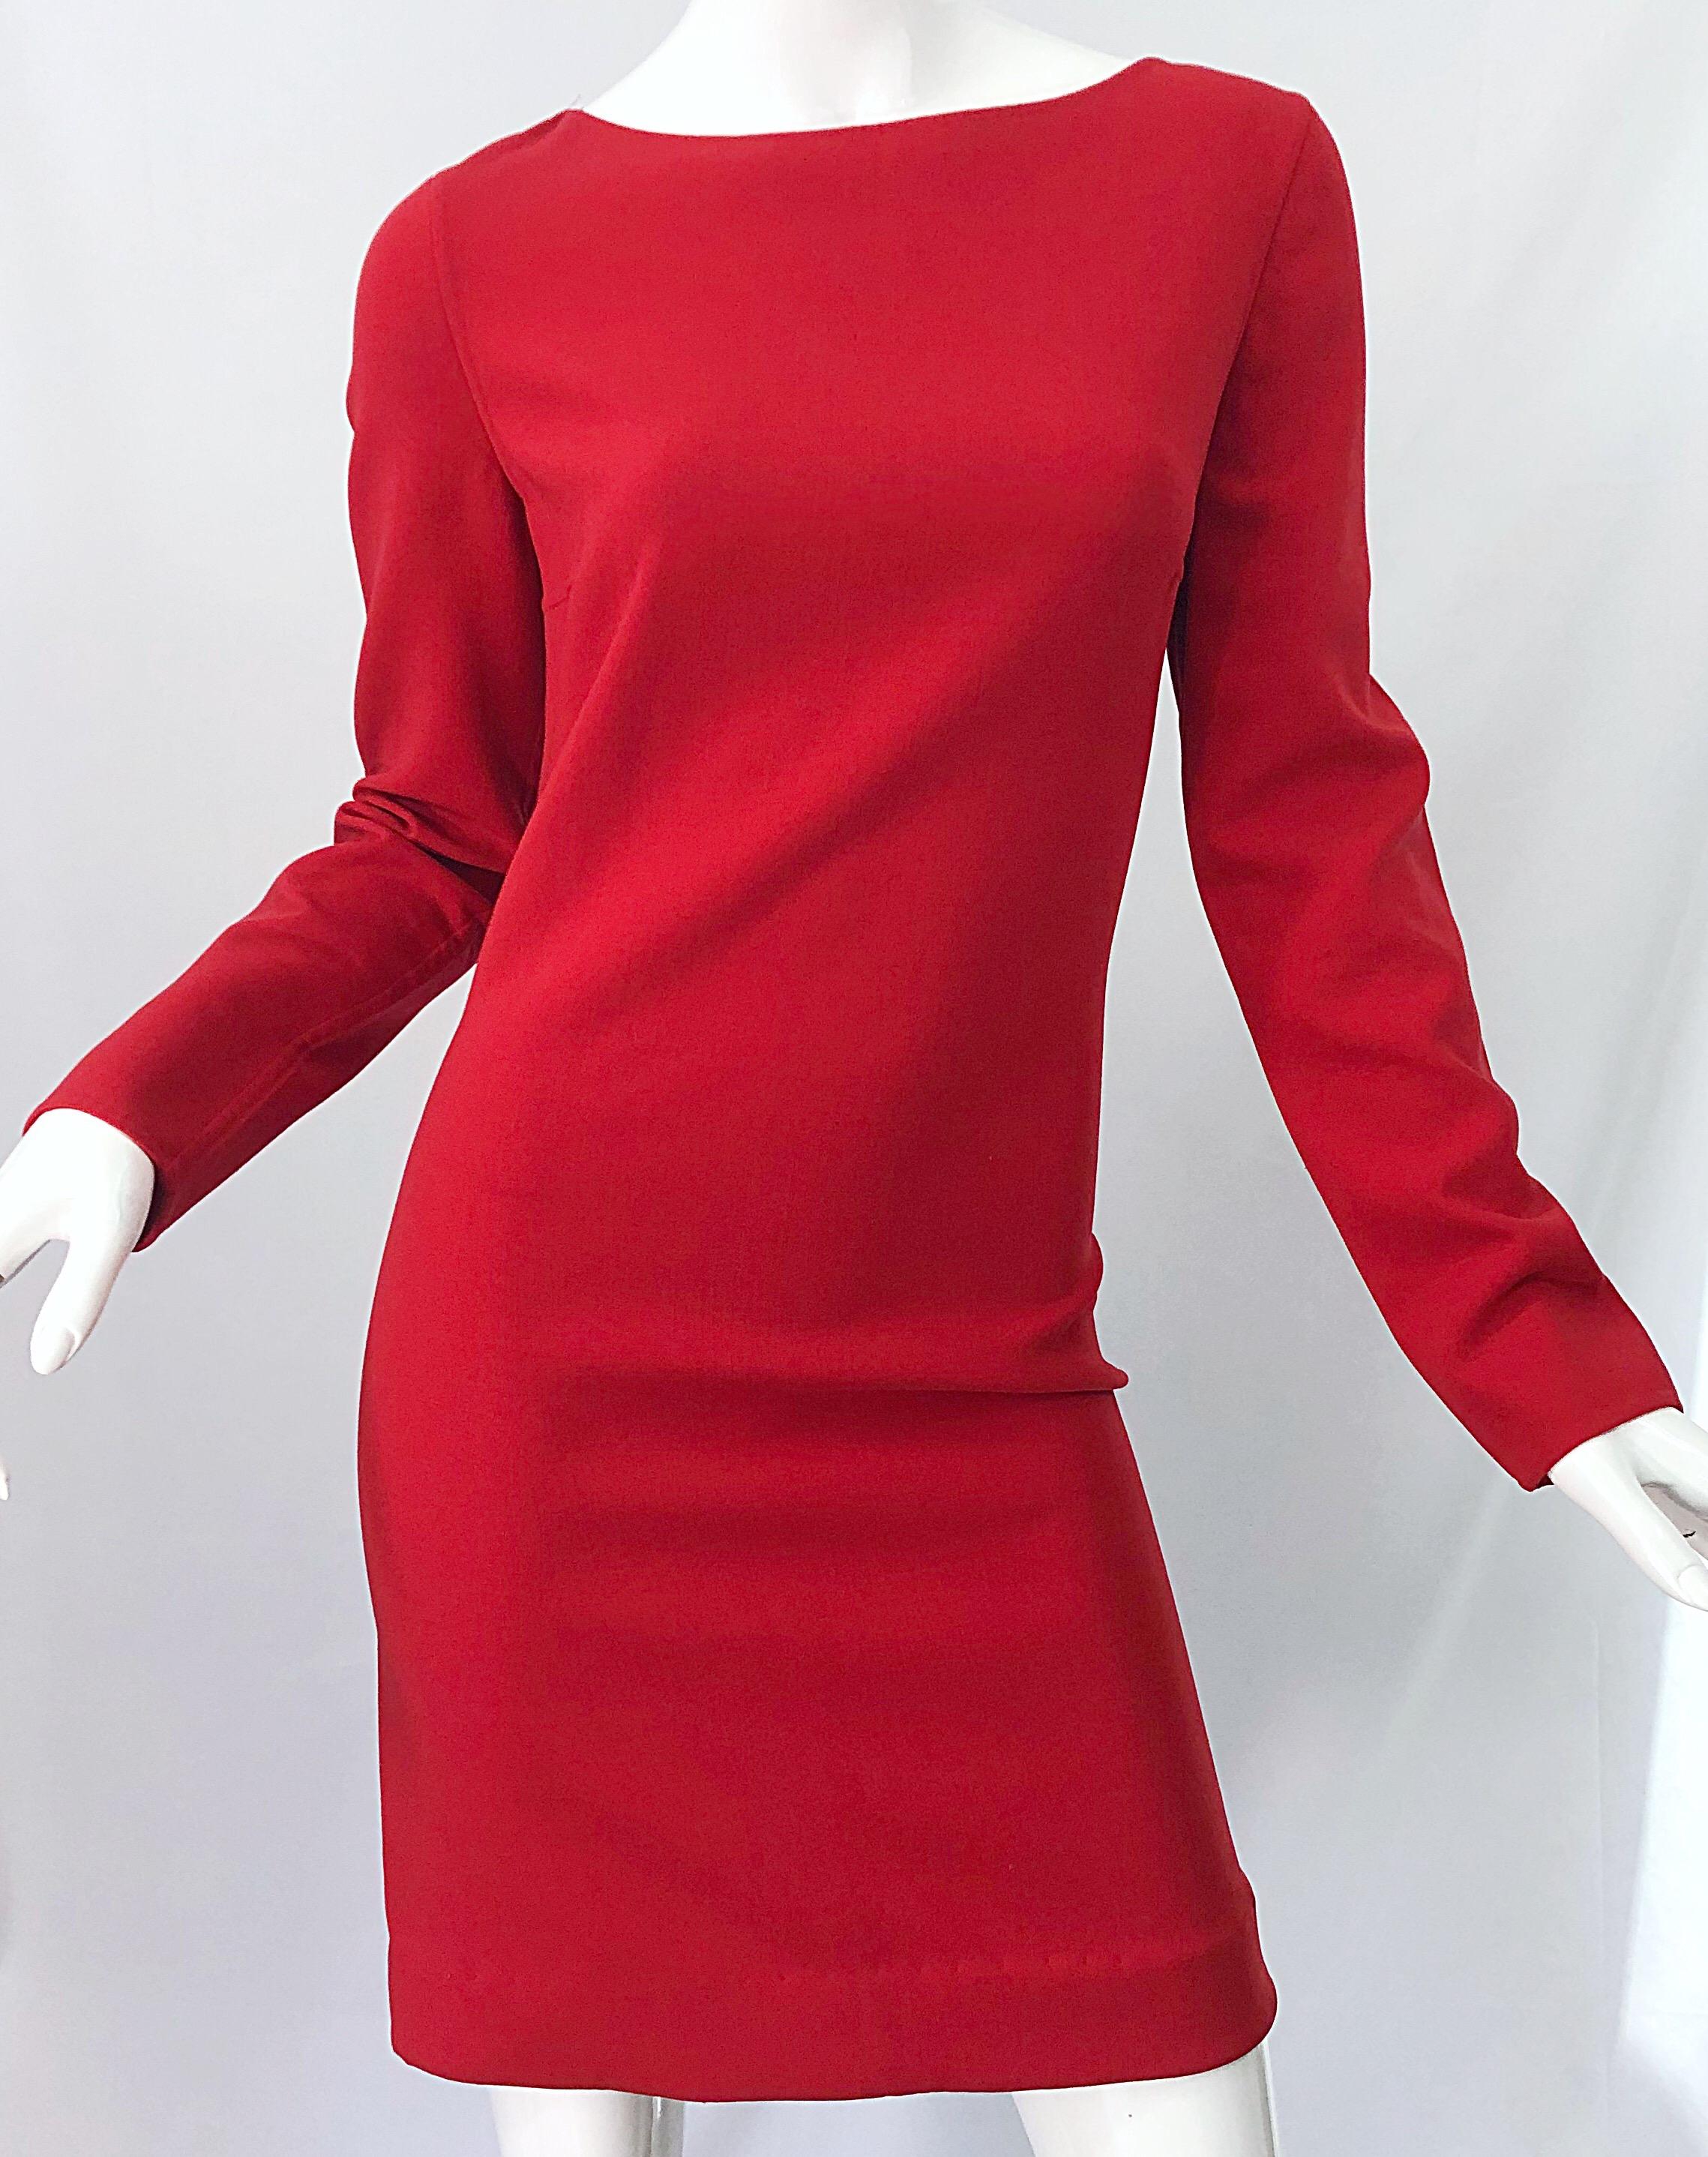 Michael Kors Collection Size 10 Early 2000s Lipstick Red Long Sleeve Dress For Sale 4